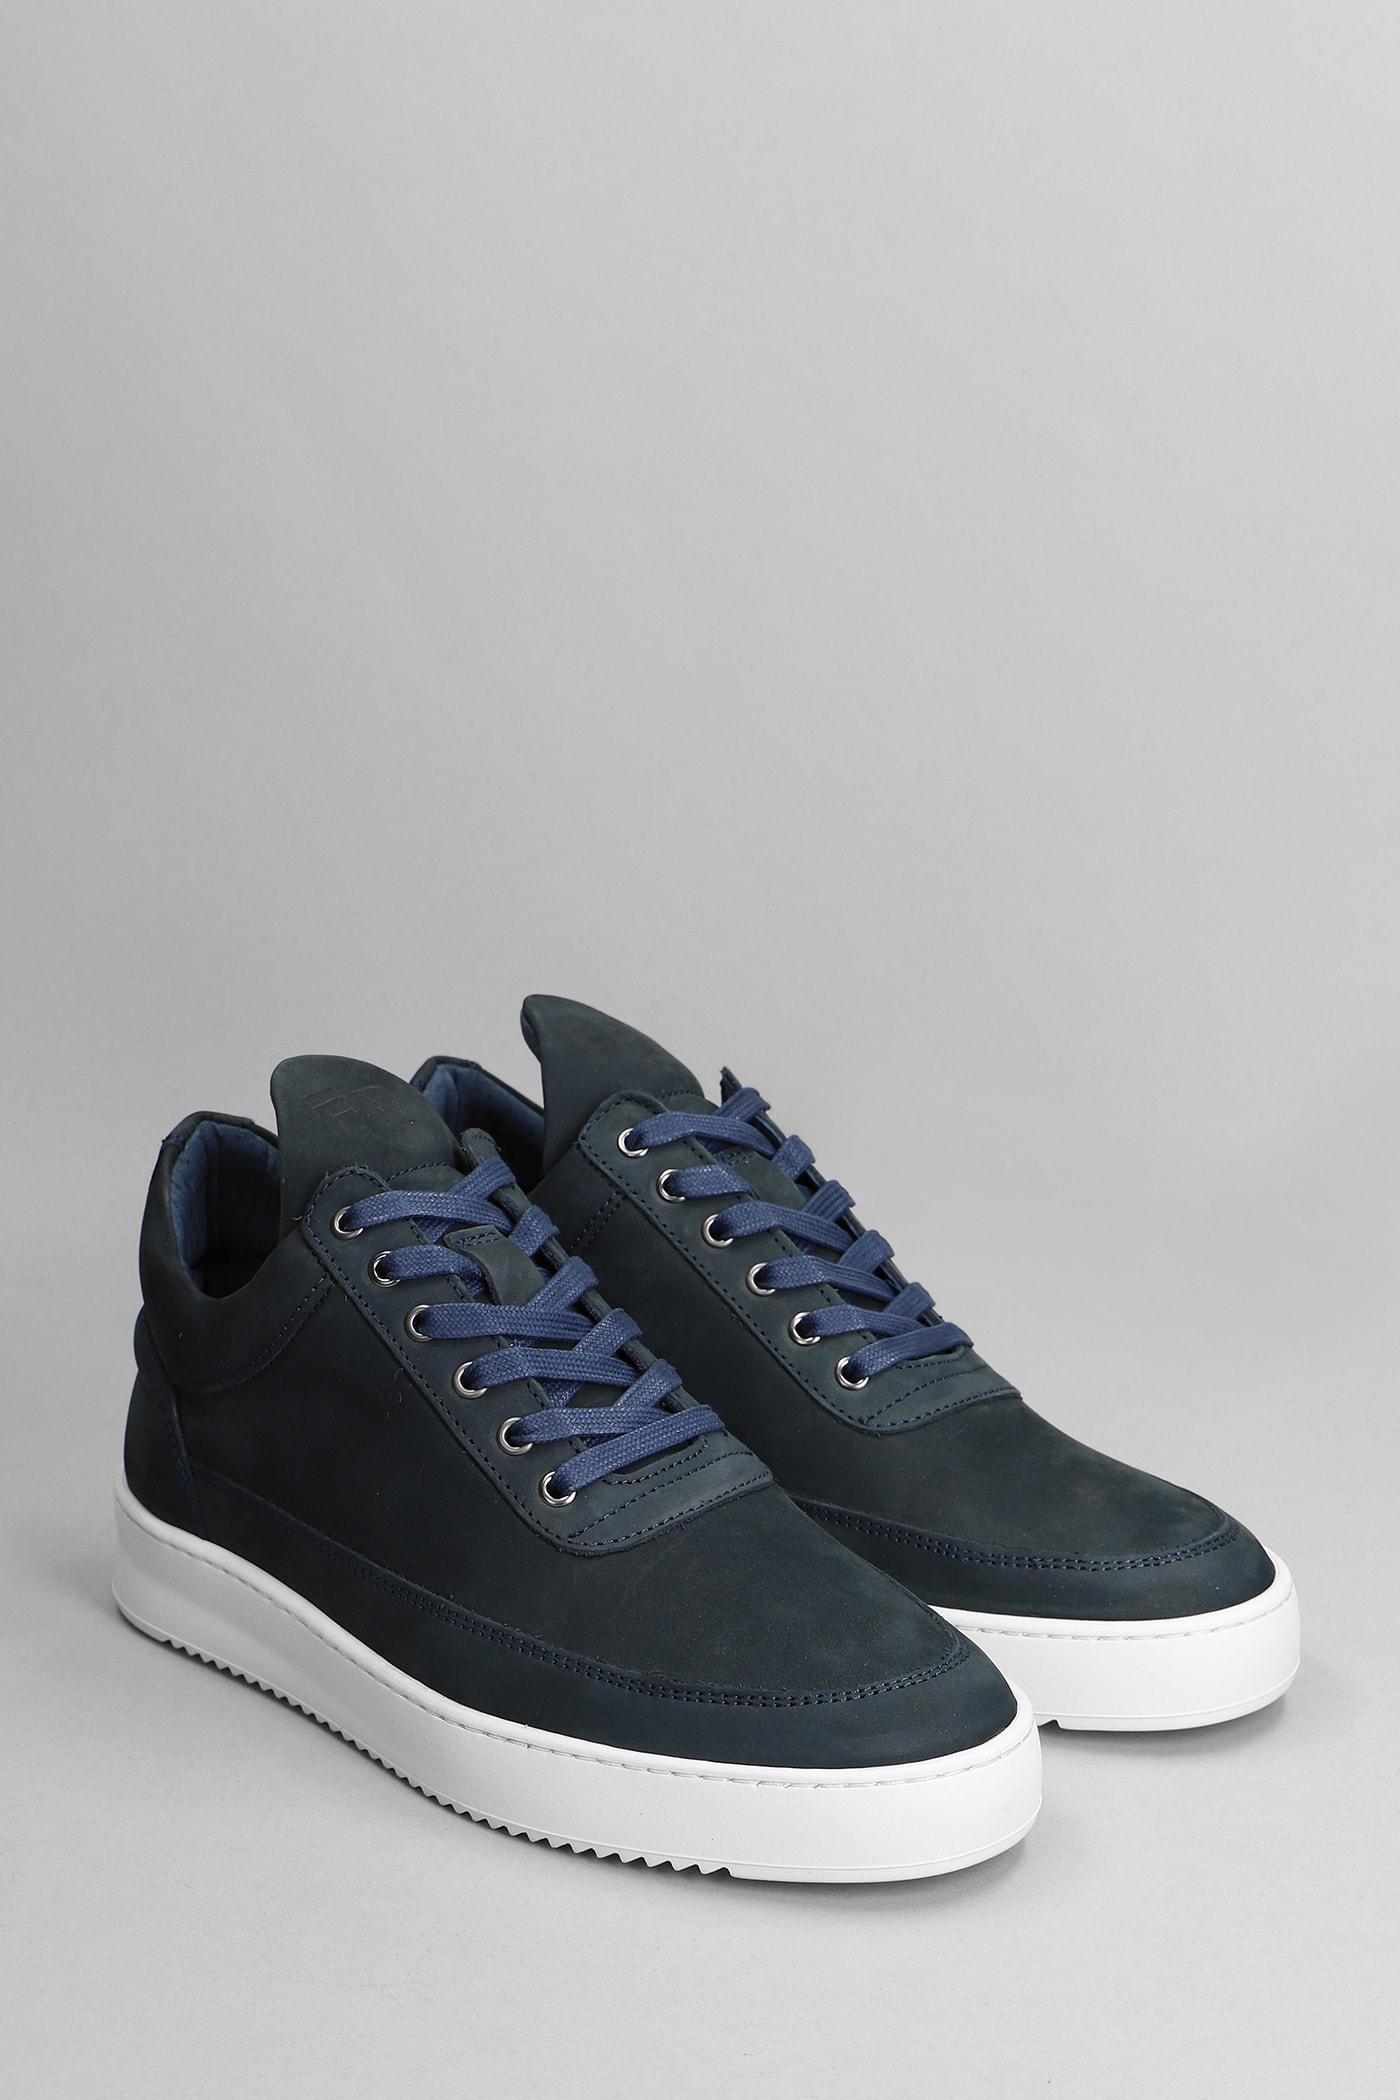 Filling Pieces Rubber Low Top Ripple Sneakers In Petroleum Nubuck for Men |  Lyst